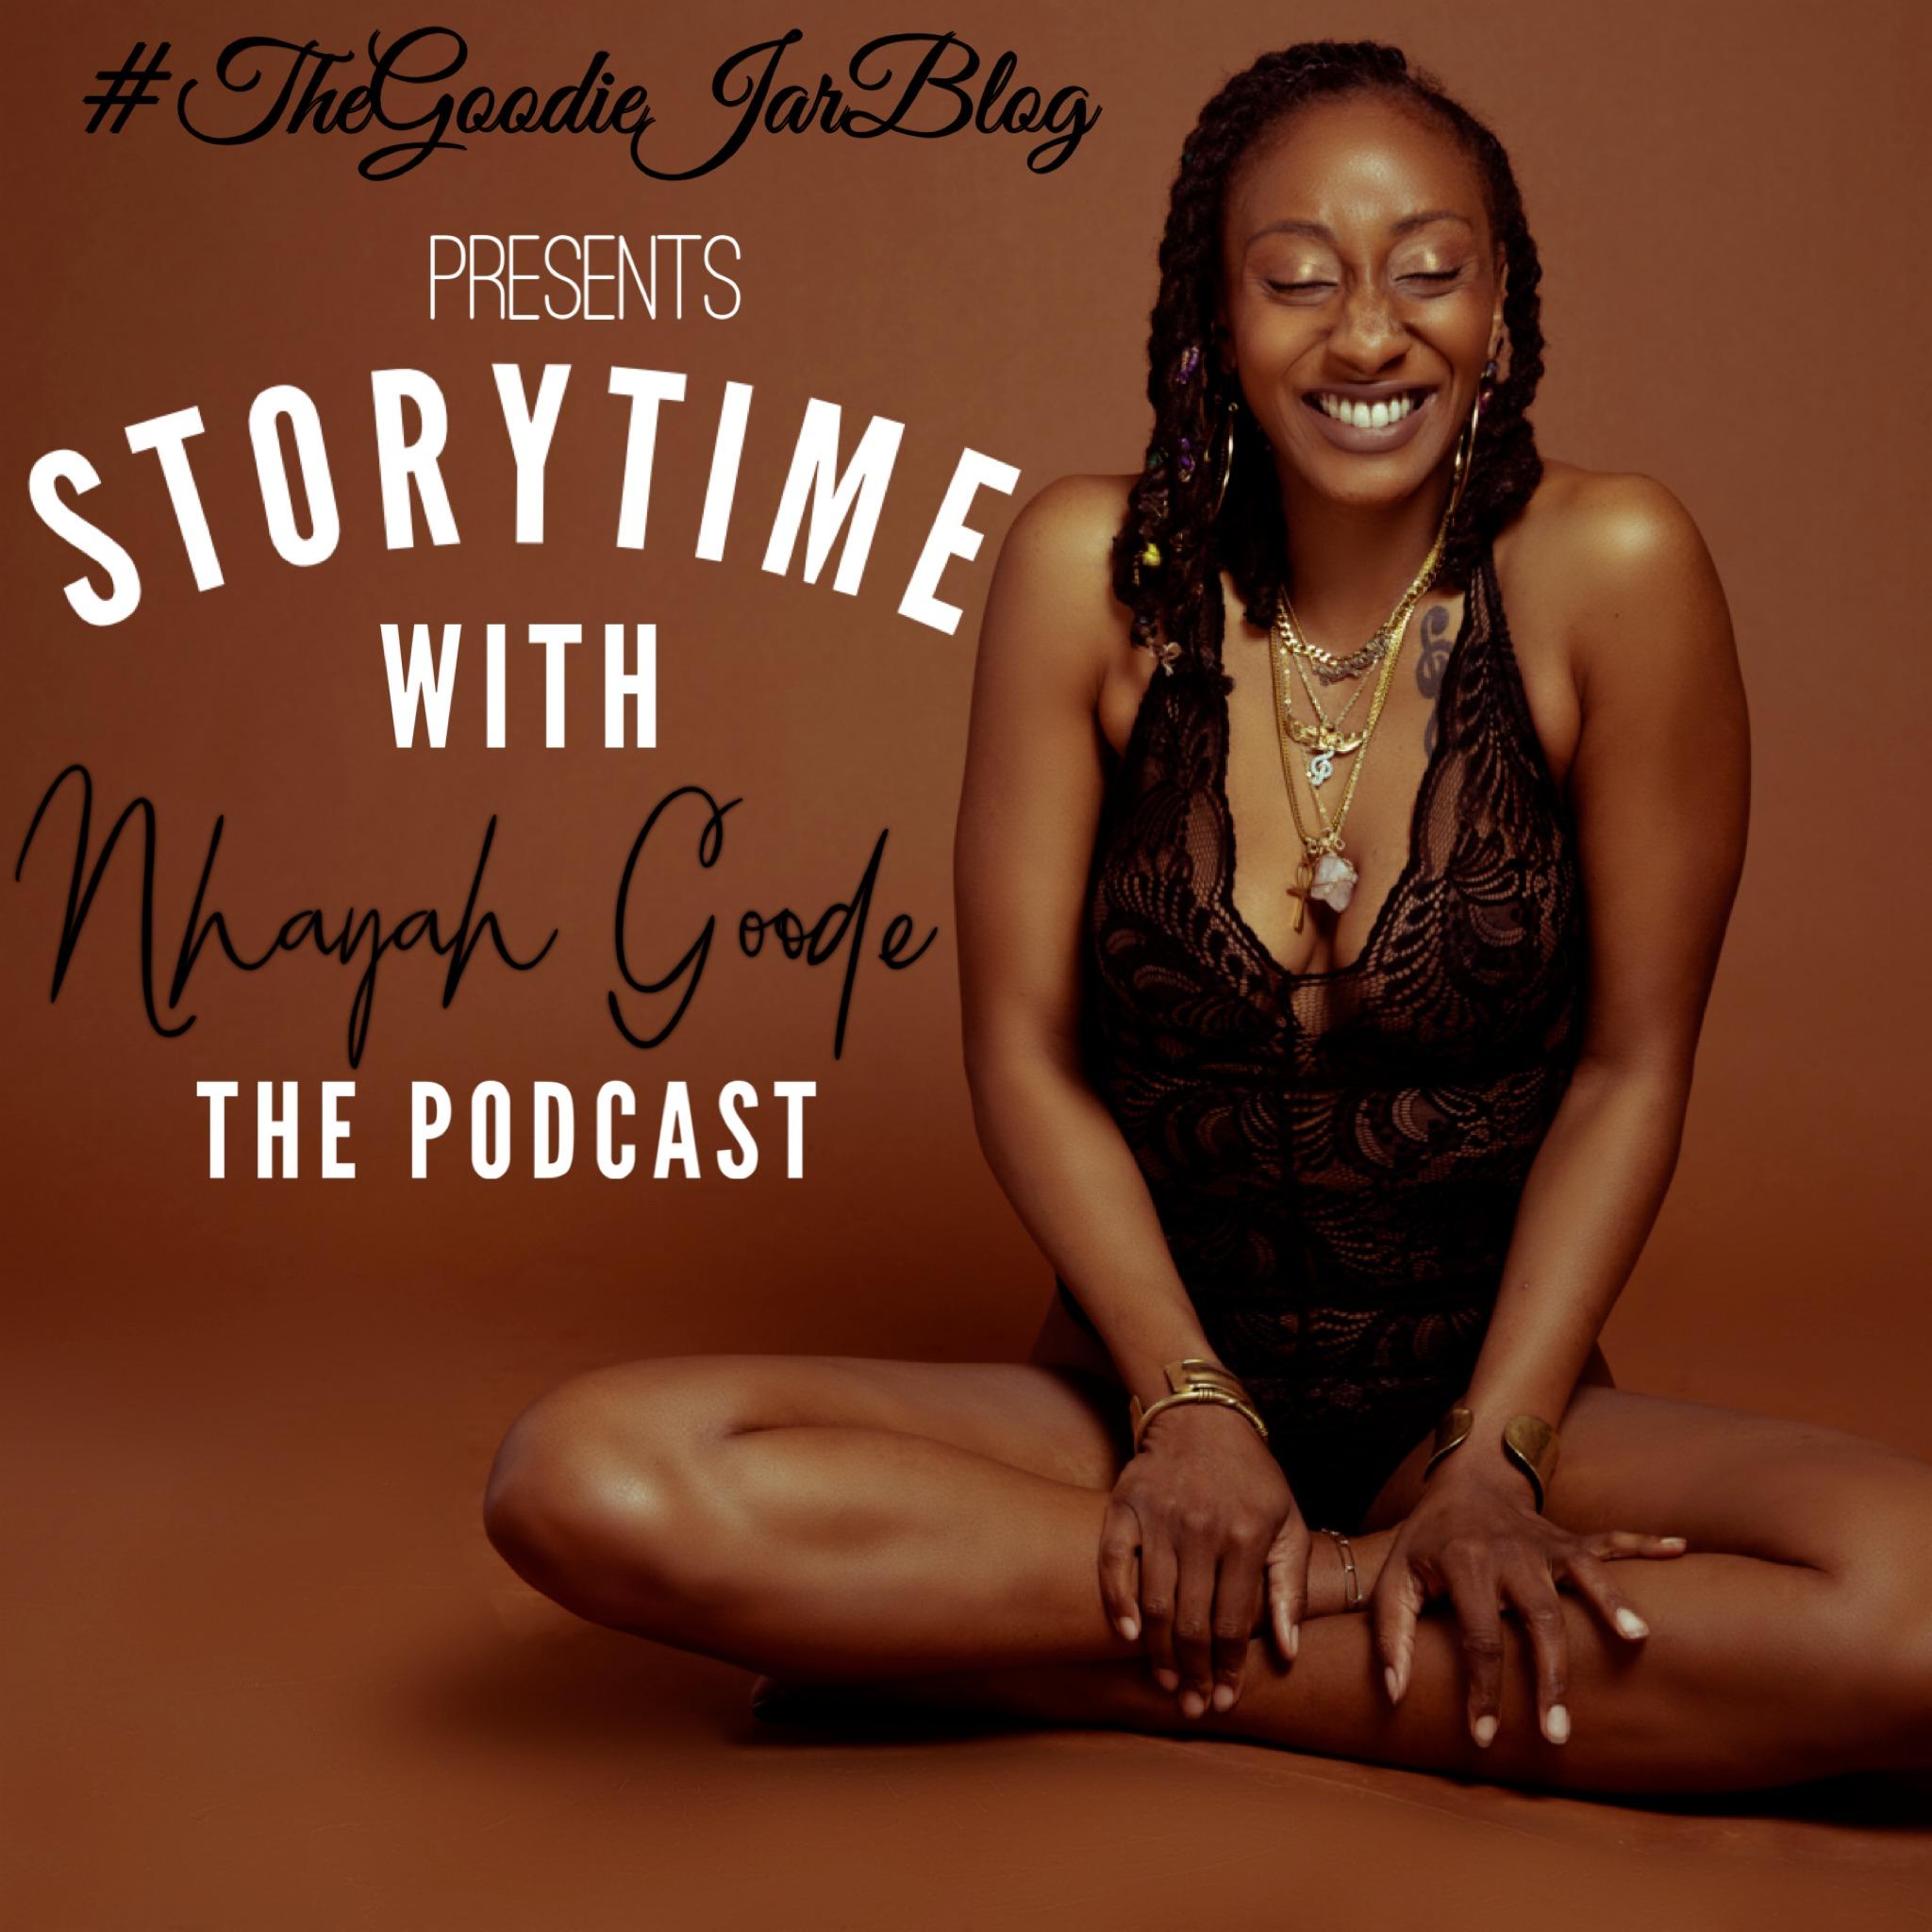 Storytime with Nhayah Goode